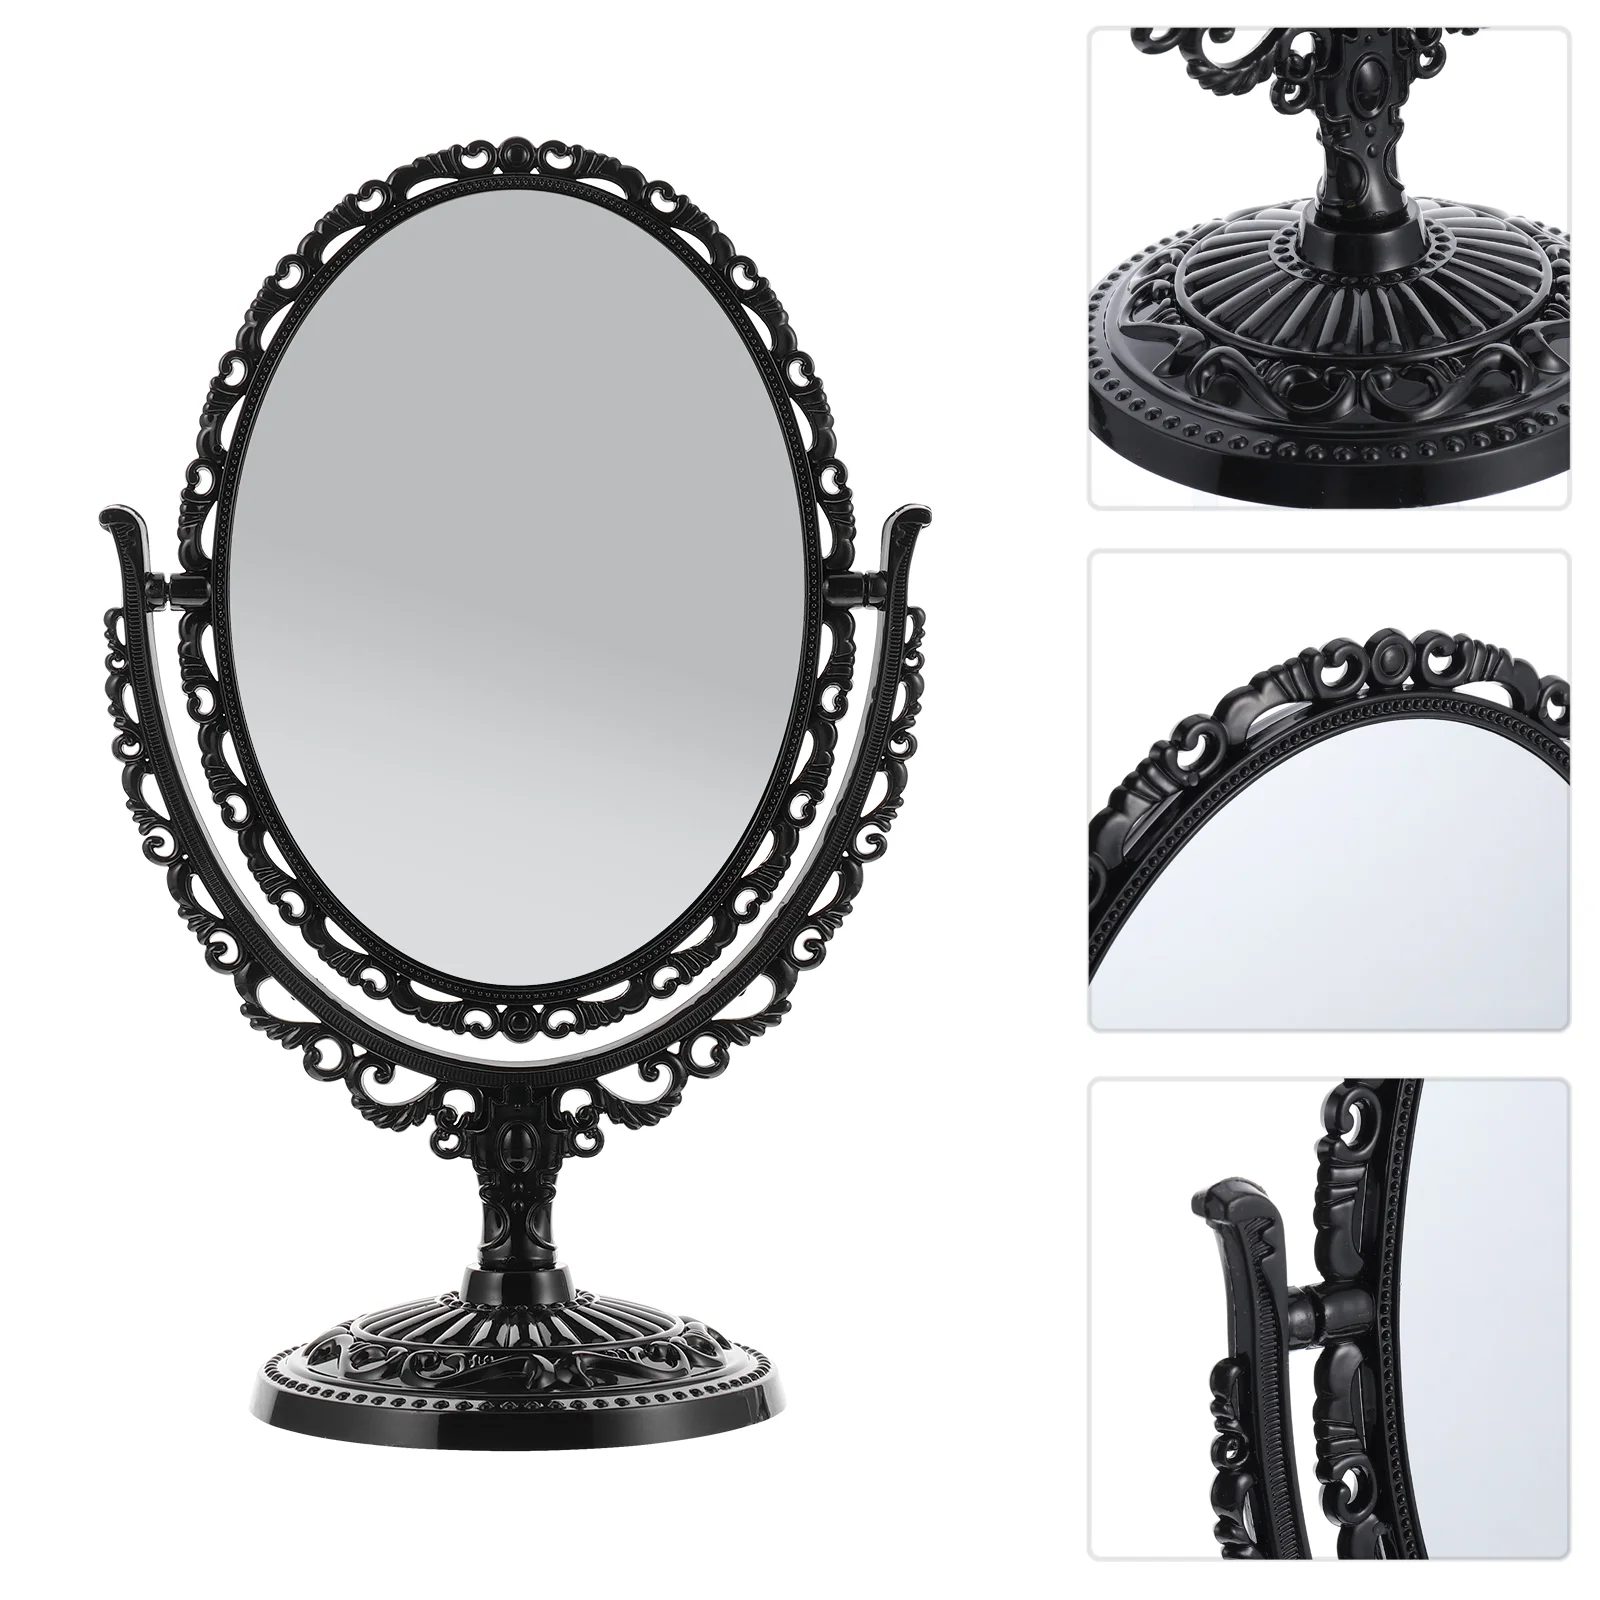 

Mirror Vanity Swivel Desk Stand Vintage Tabletop Makeup Mirrors Retro Oval Double Sided Dresser Portable Dressing European Two